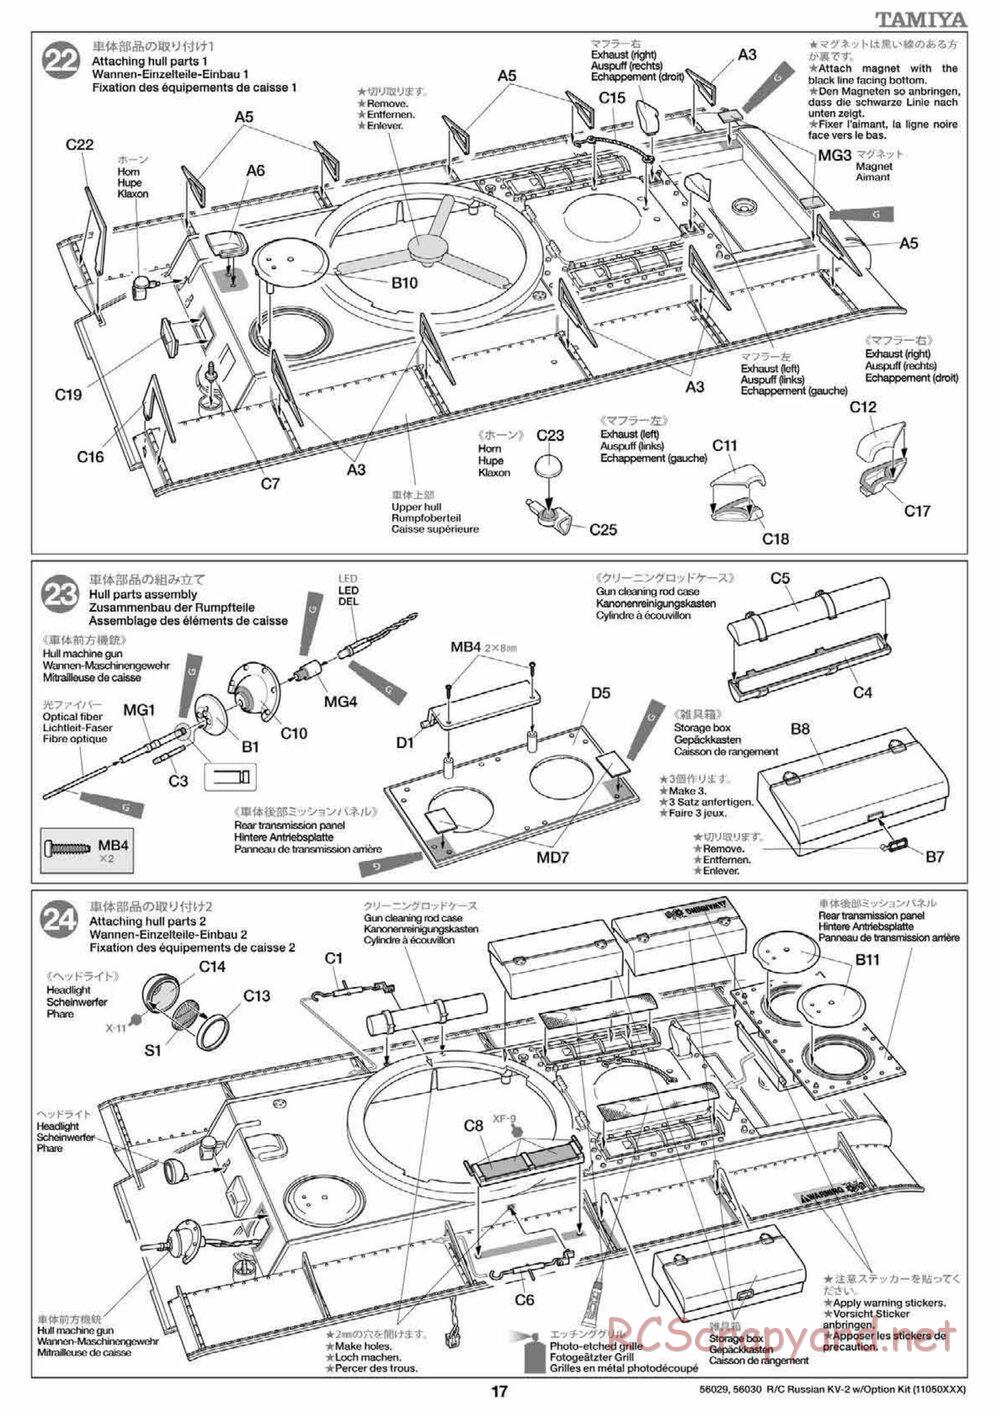 Tamiya - Russian Heavy Tank KV-2 Gigant - 1/16 Scale Chassis - Manual - Page 17